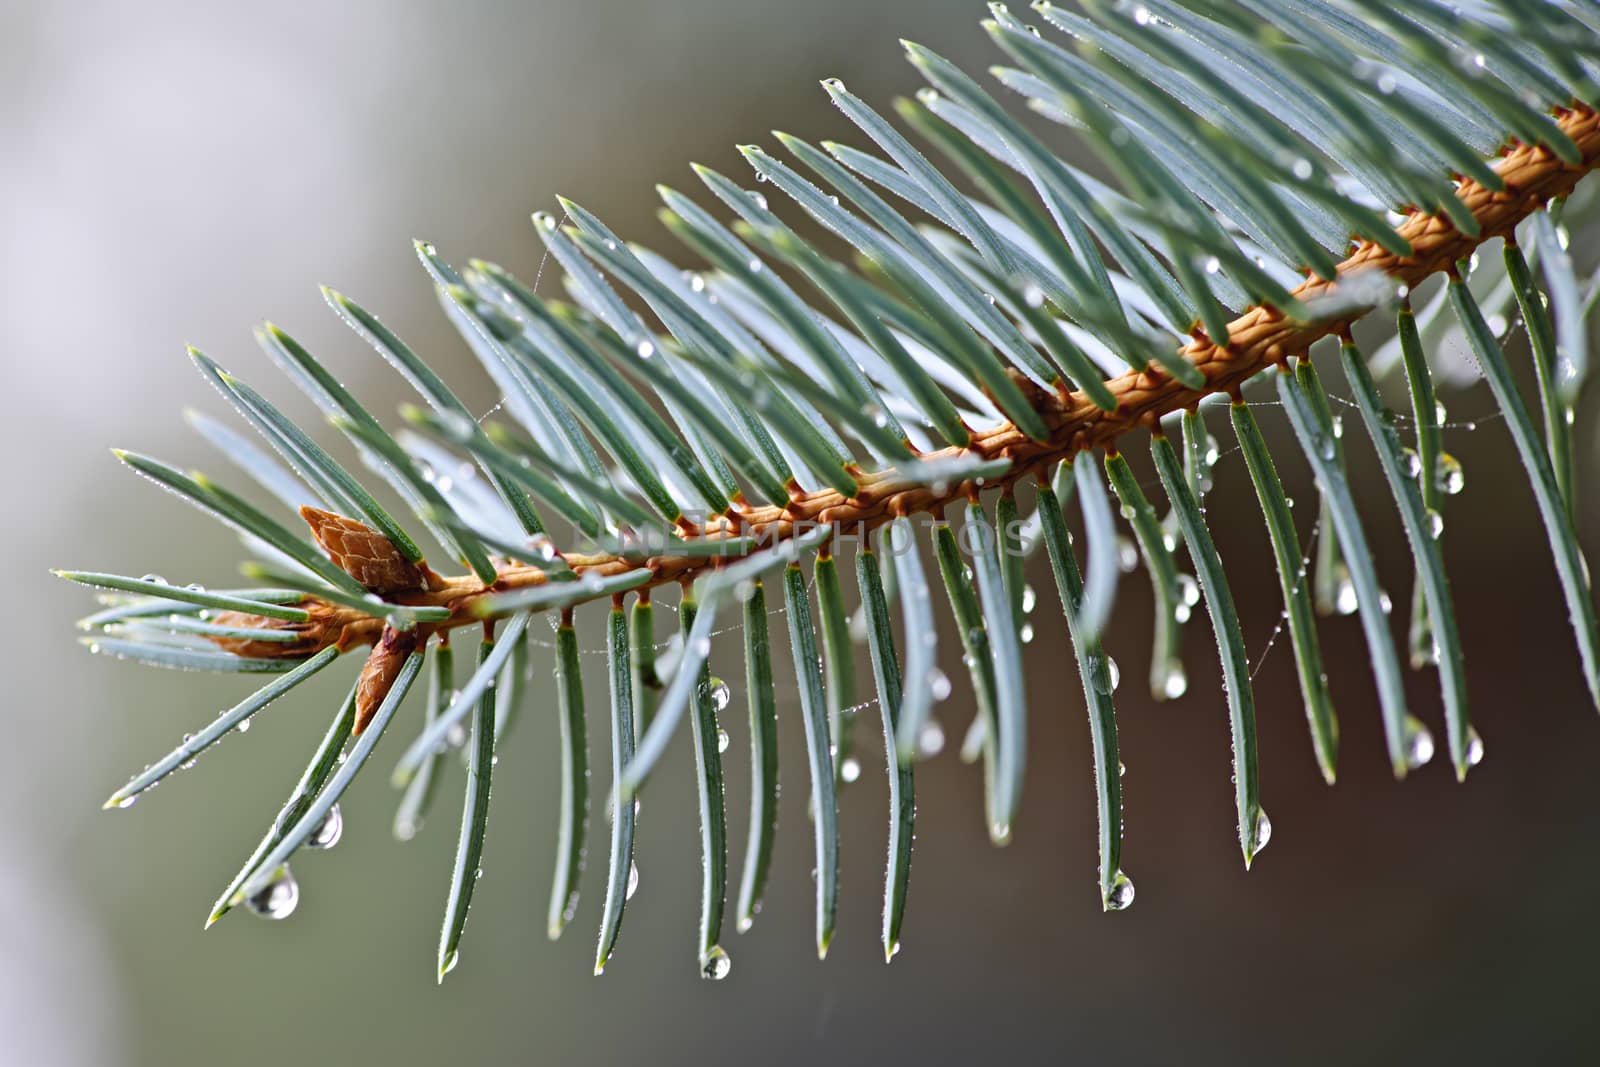 Closeup of blue spruce tree branch with needles and dew drops